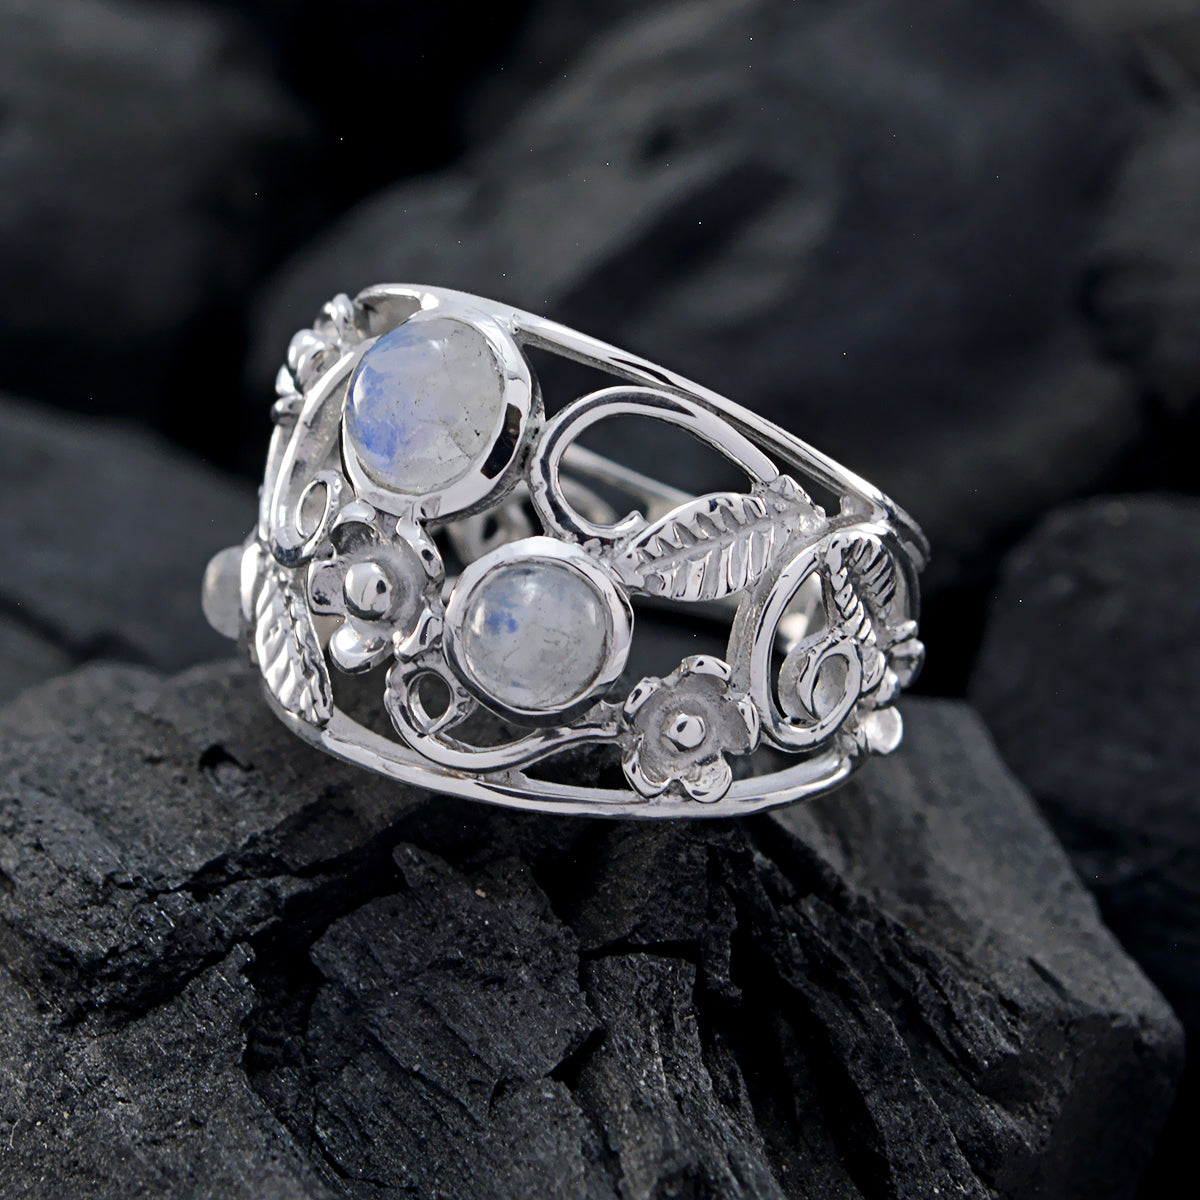 Fascinating Gem Rainbow Moonstone 925 Silver Ring Handcrafted Jewelry